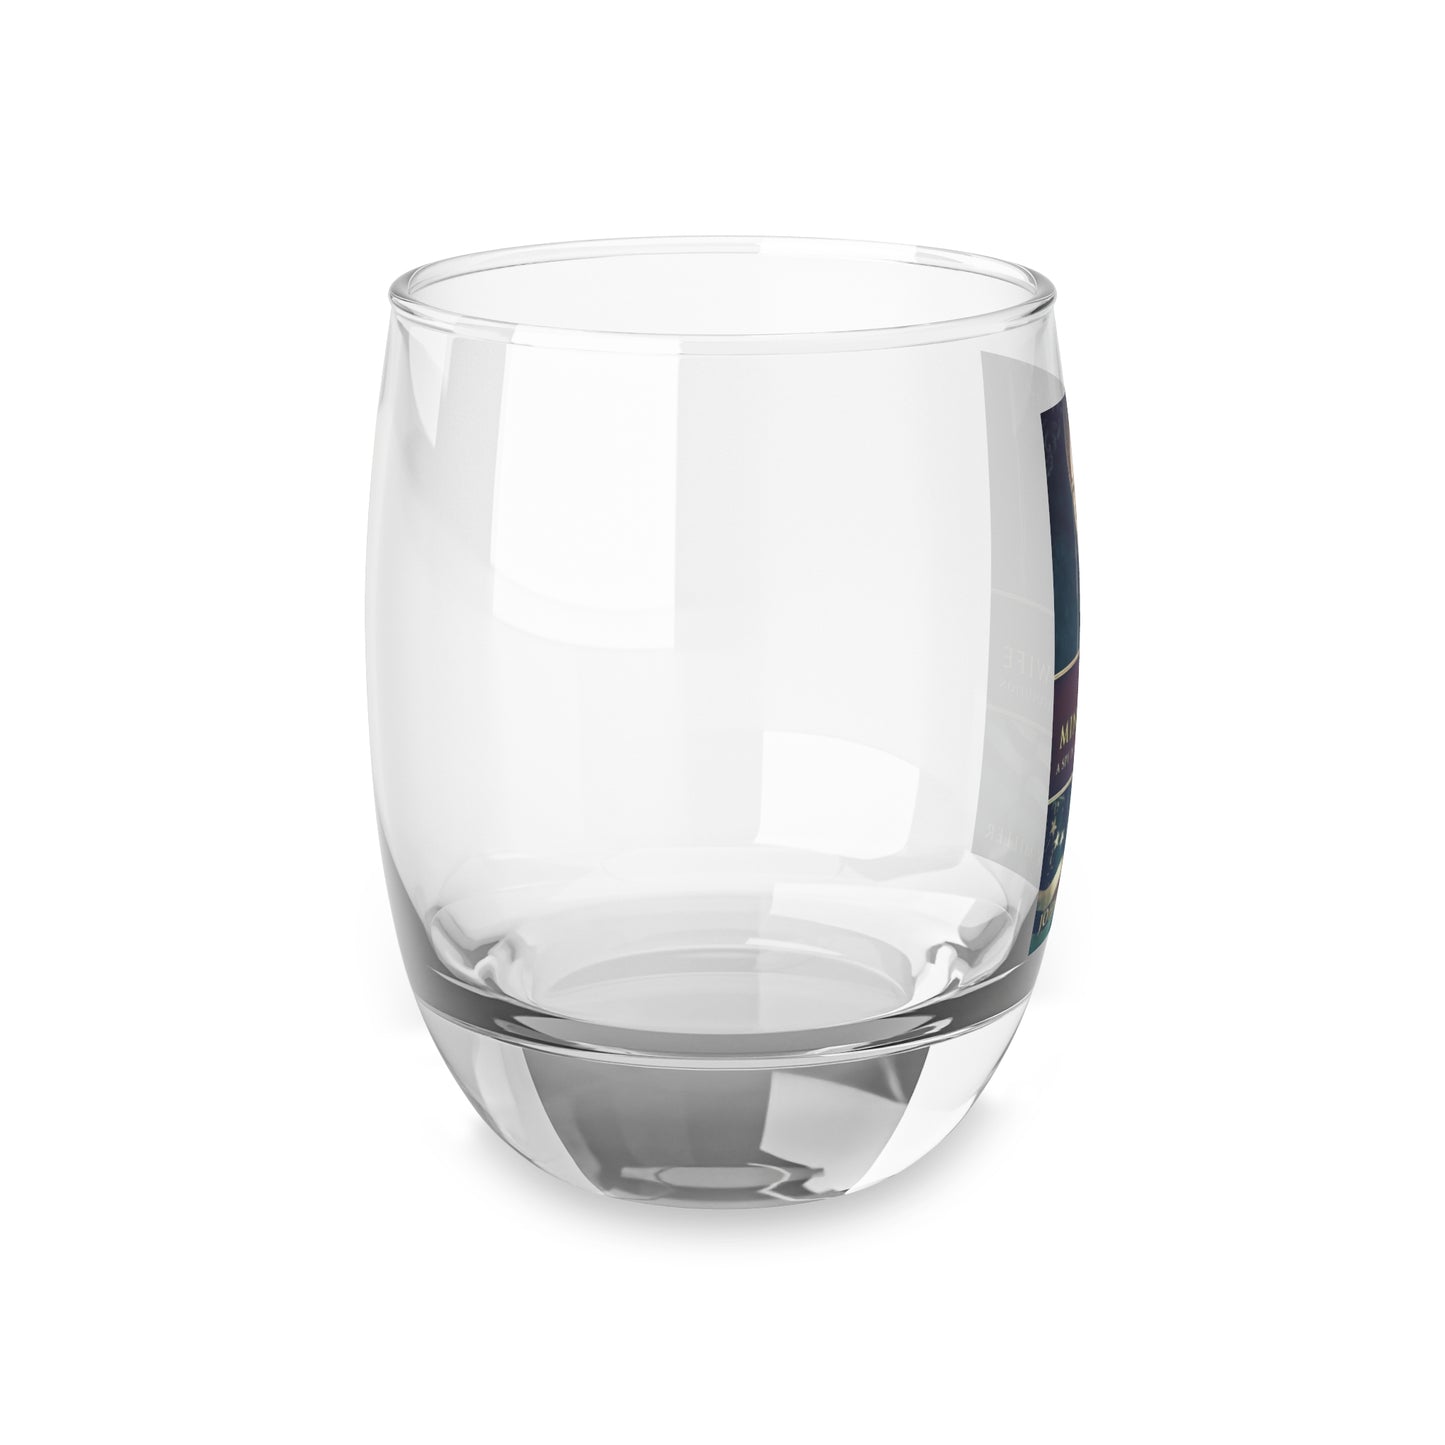 The Minister's Wife - Whiskey Glass